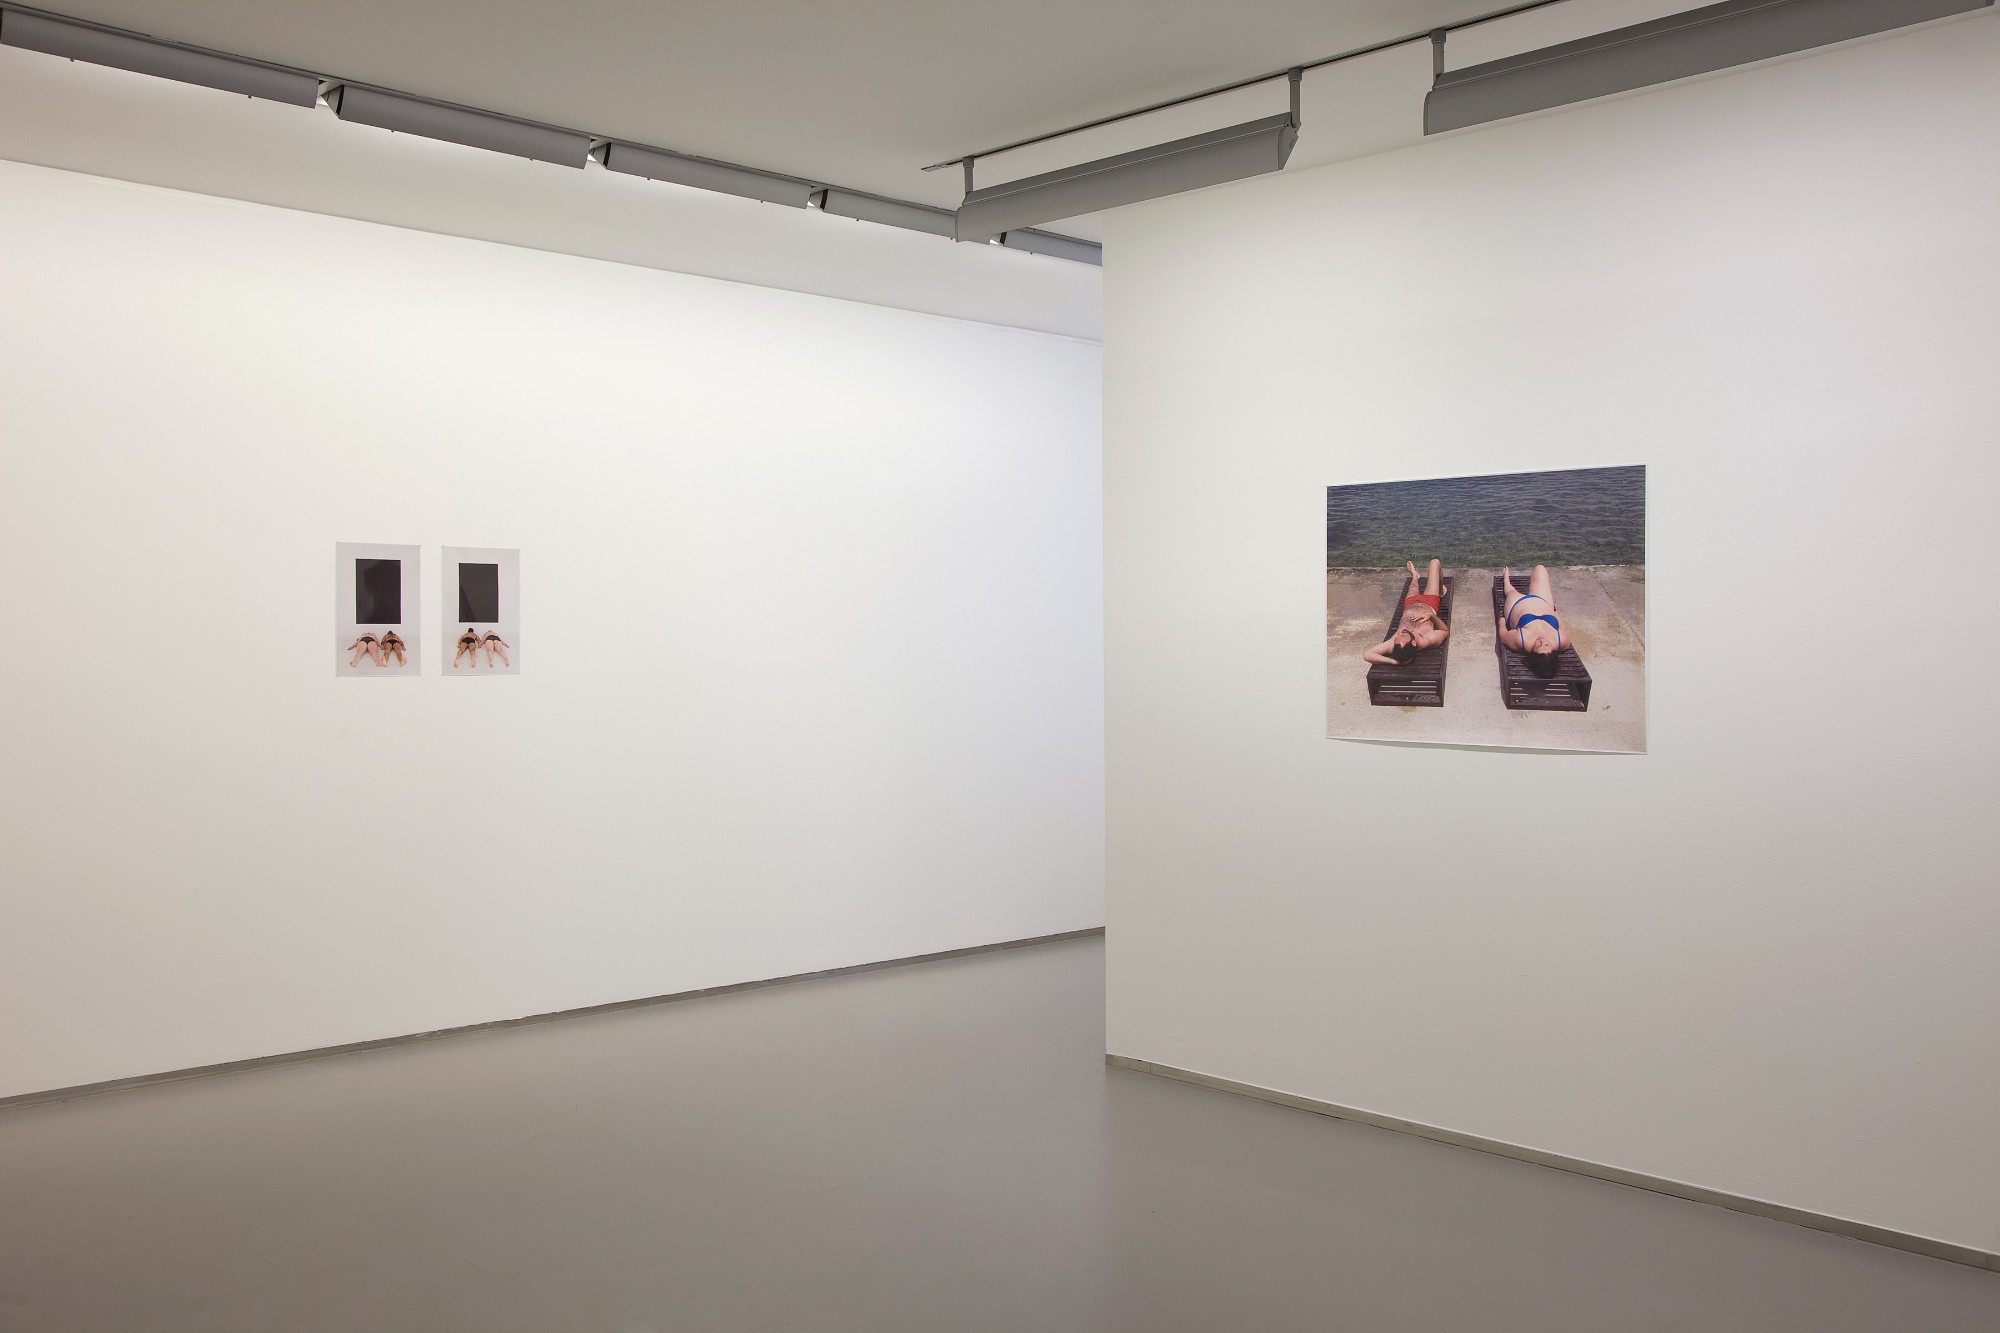 Collaboration_Patrycja German / Holger Endres, Exhibition view, 2015